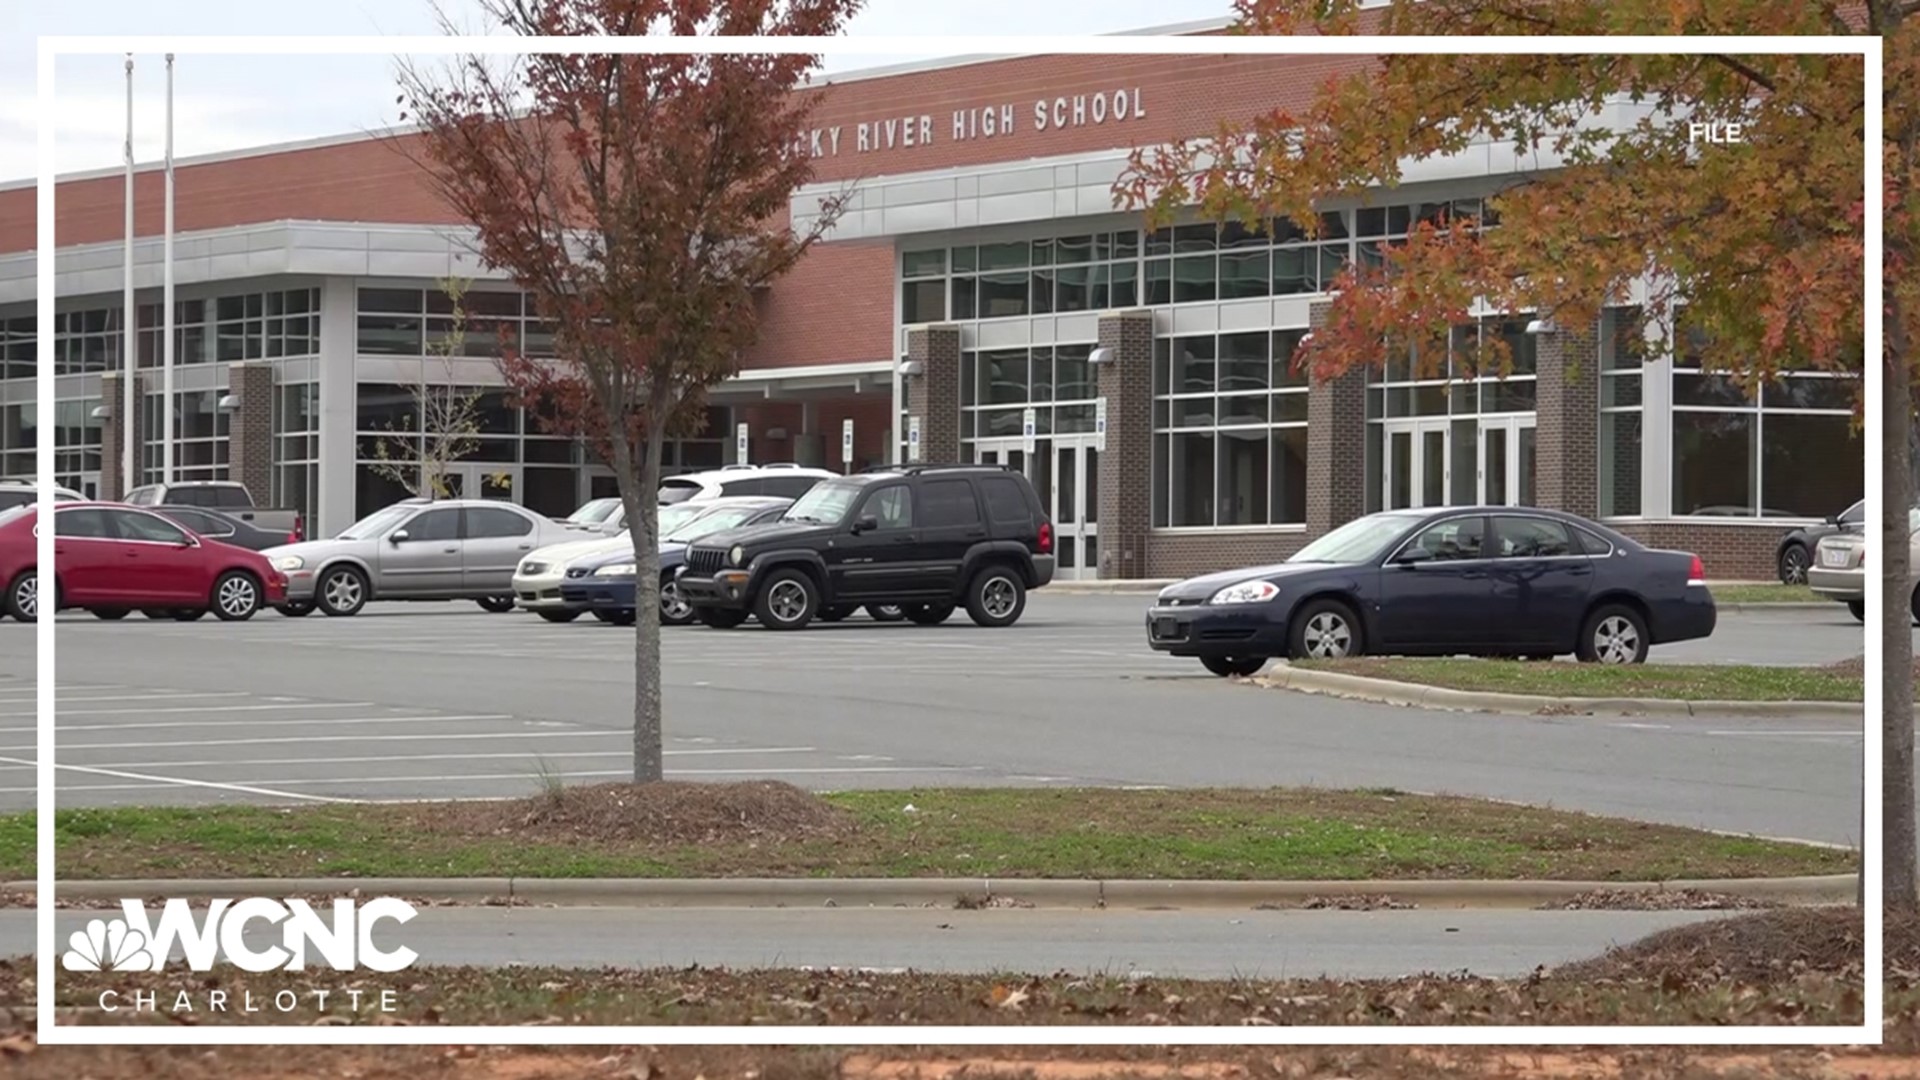 CMS confirms a student brought a gun to Rocky River High School today. It's the second time this month that's happened at the school.